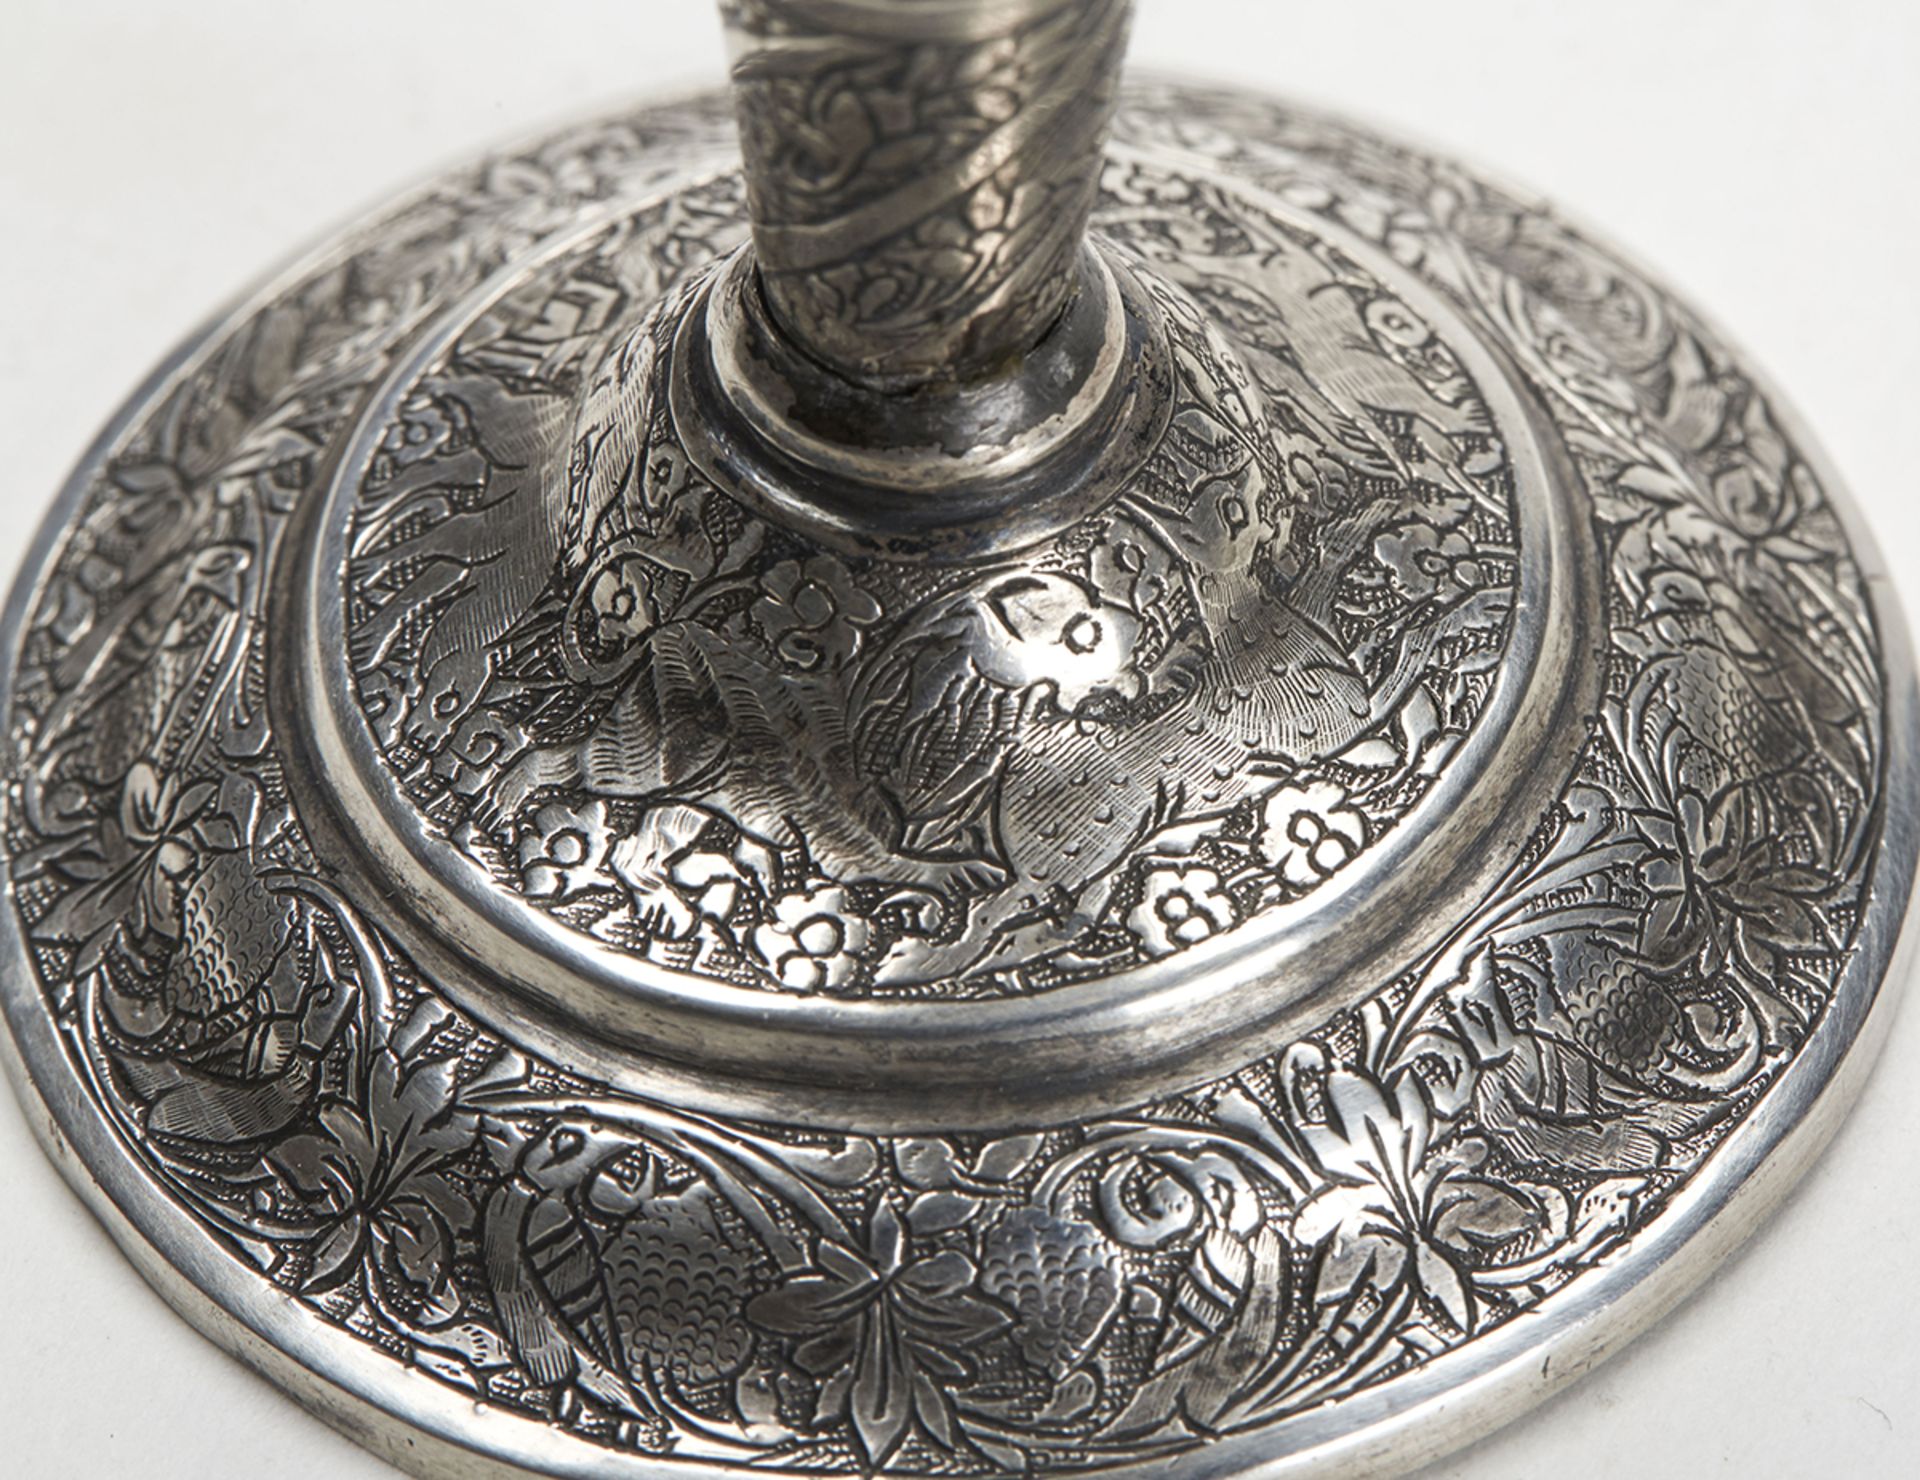 Antique Indian/Asian Silver Figural Vase 19Th C. - Image 8 of 9